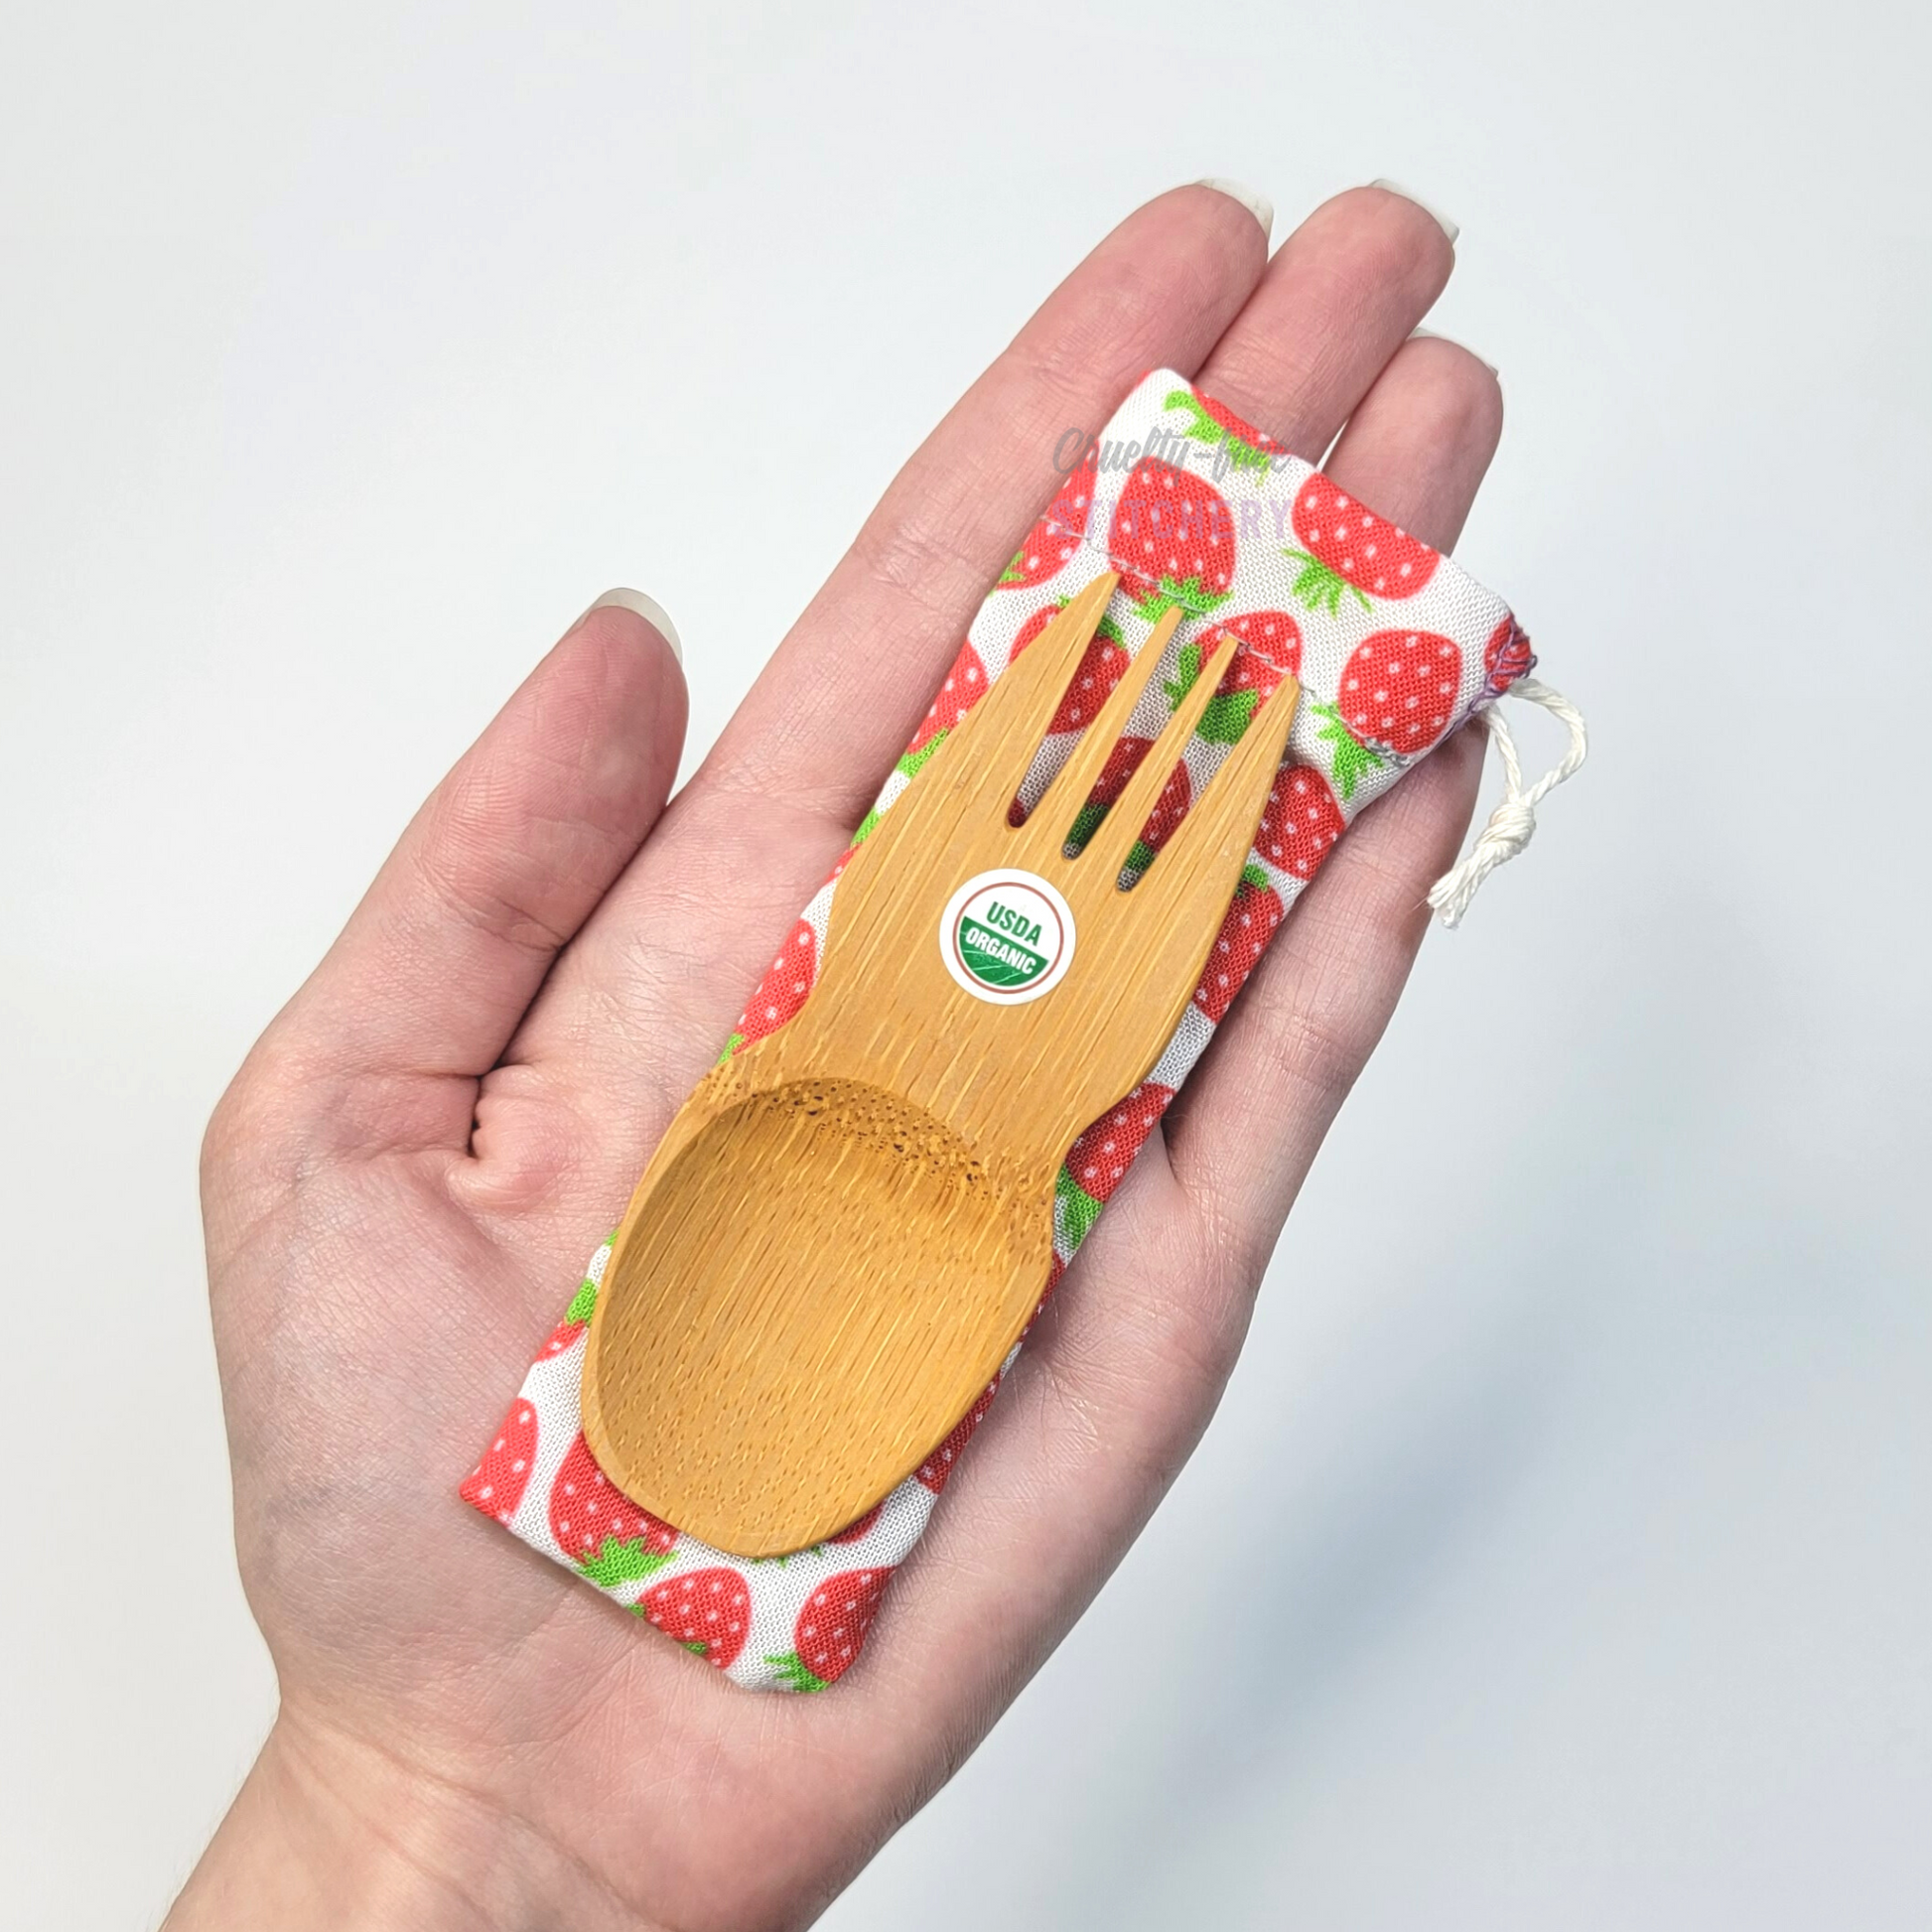 Strawberry print fabric pouch with bamboo spork on top, laid on a hand for size reference. The spork is slightly longer than the fingers.